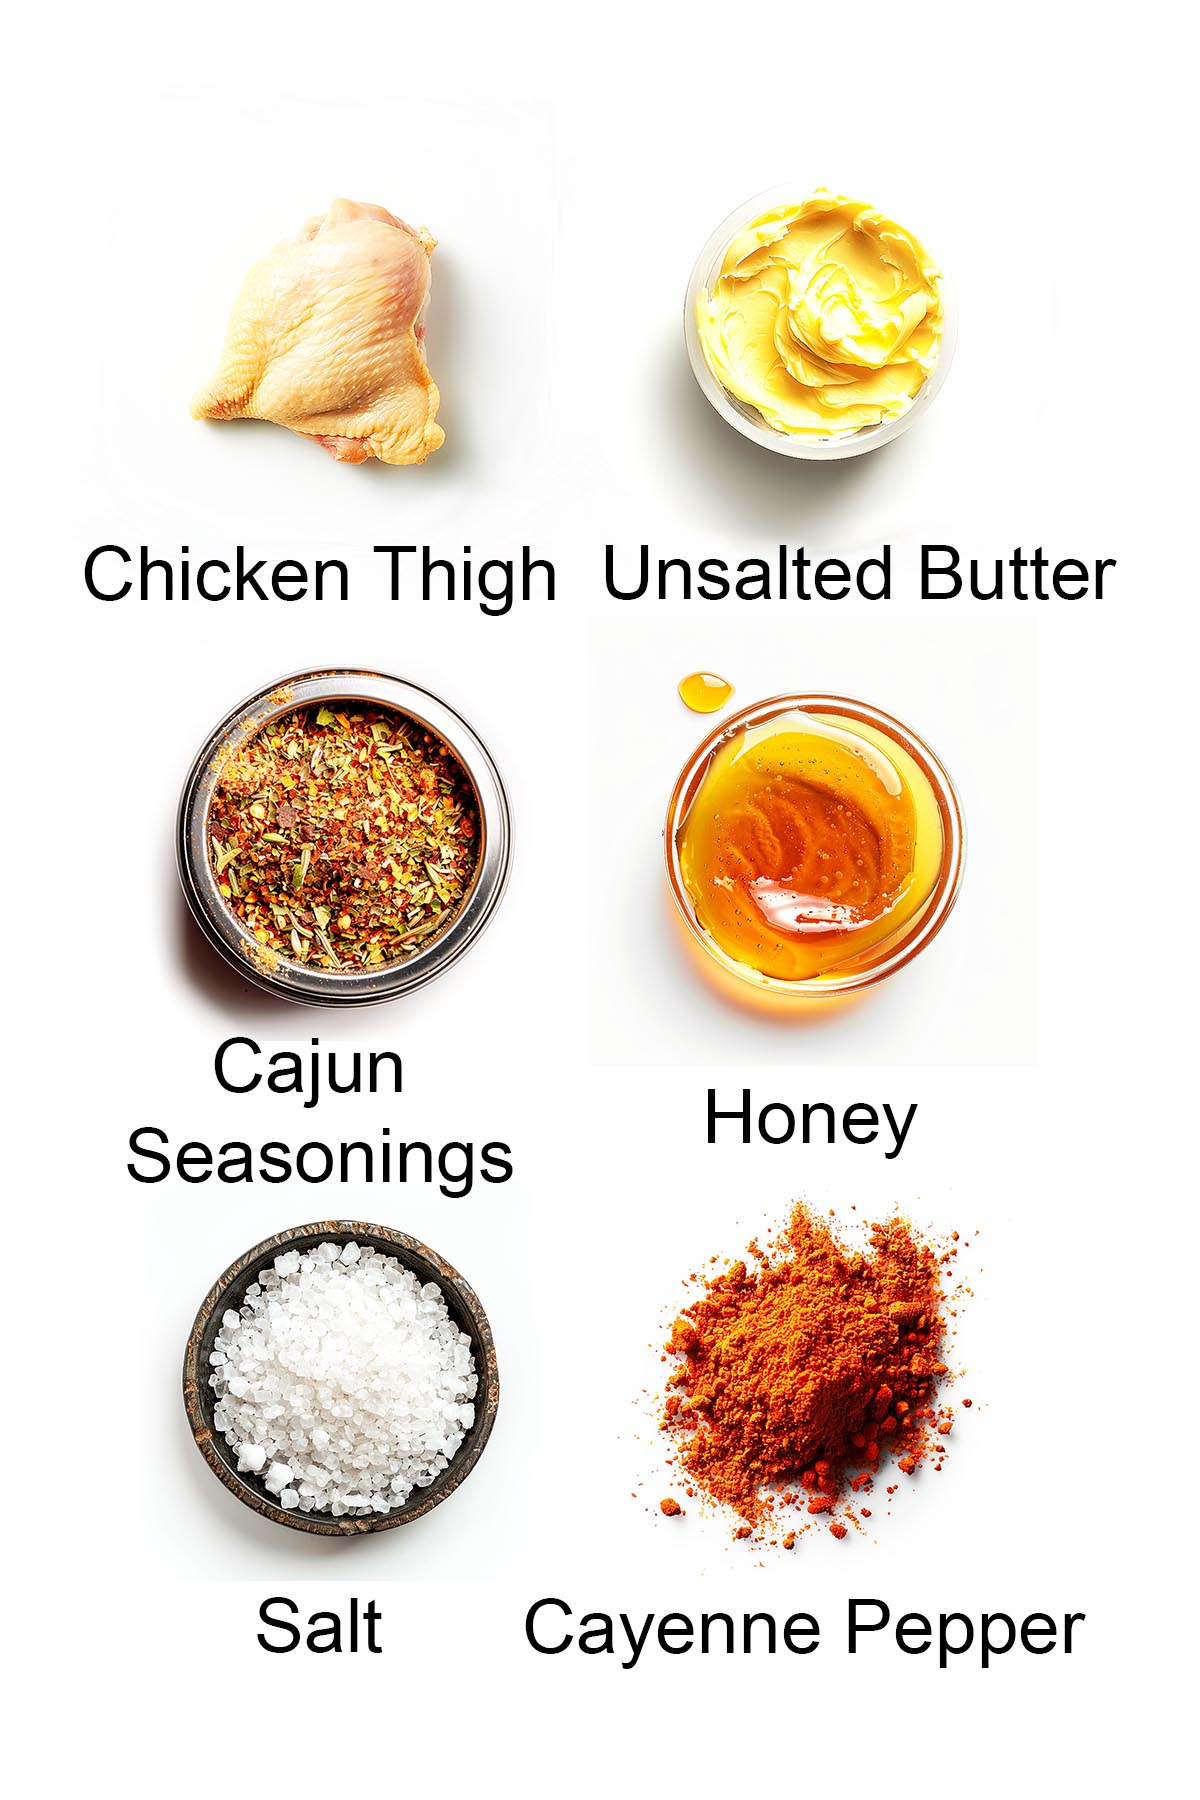 Picture showing all the ingredients for Cajun chicken recipe.